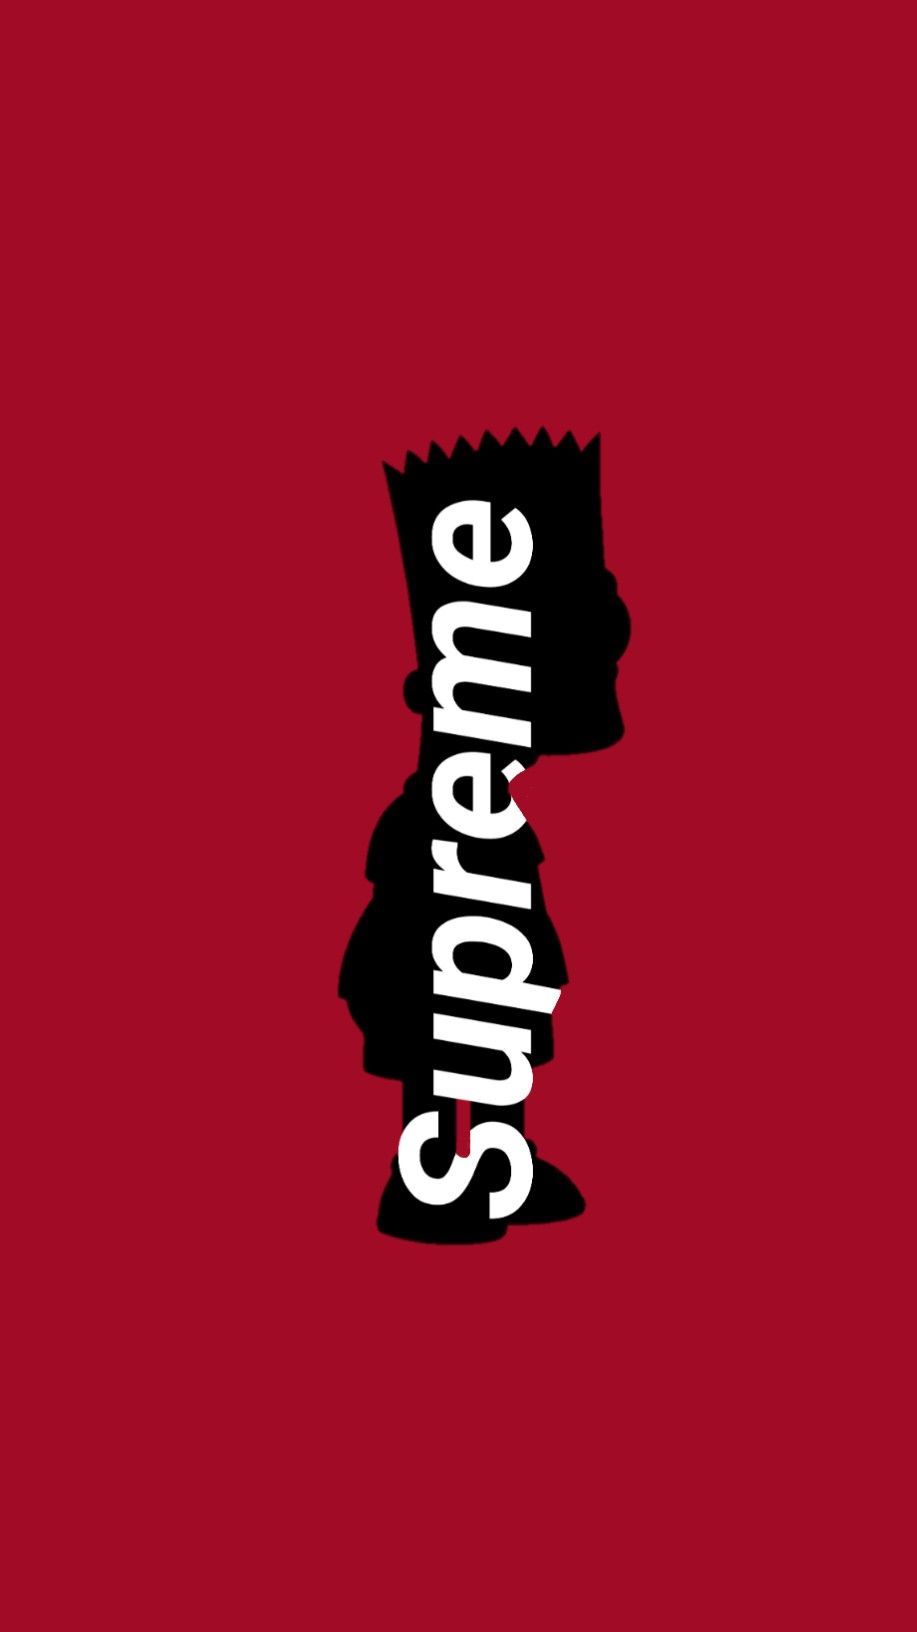 Free Download Supreme Bart Iphone7 Supremes In 19 Hypebeast Wallpaper 917x1632 For Your Desktop Mobile Tablet Explore 39 Simpsons Iphone Wallpaper Supreme Simpsons Iphone Wallpaper Supreme Supreme Simpsons Wallpapers